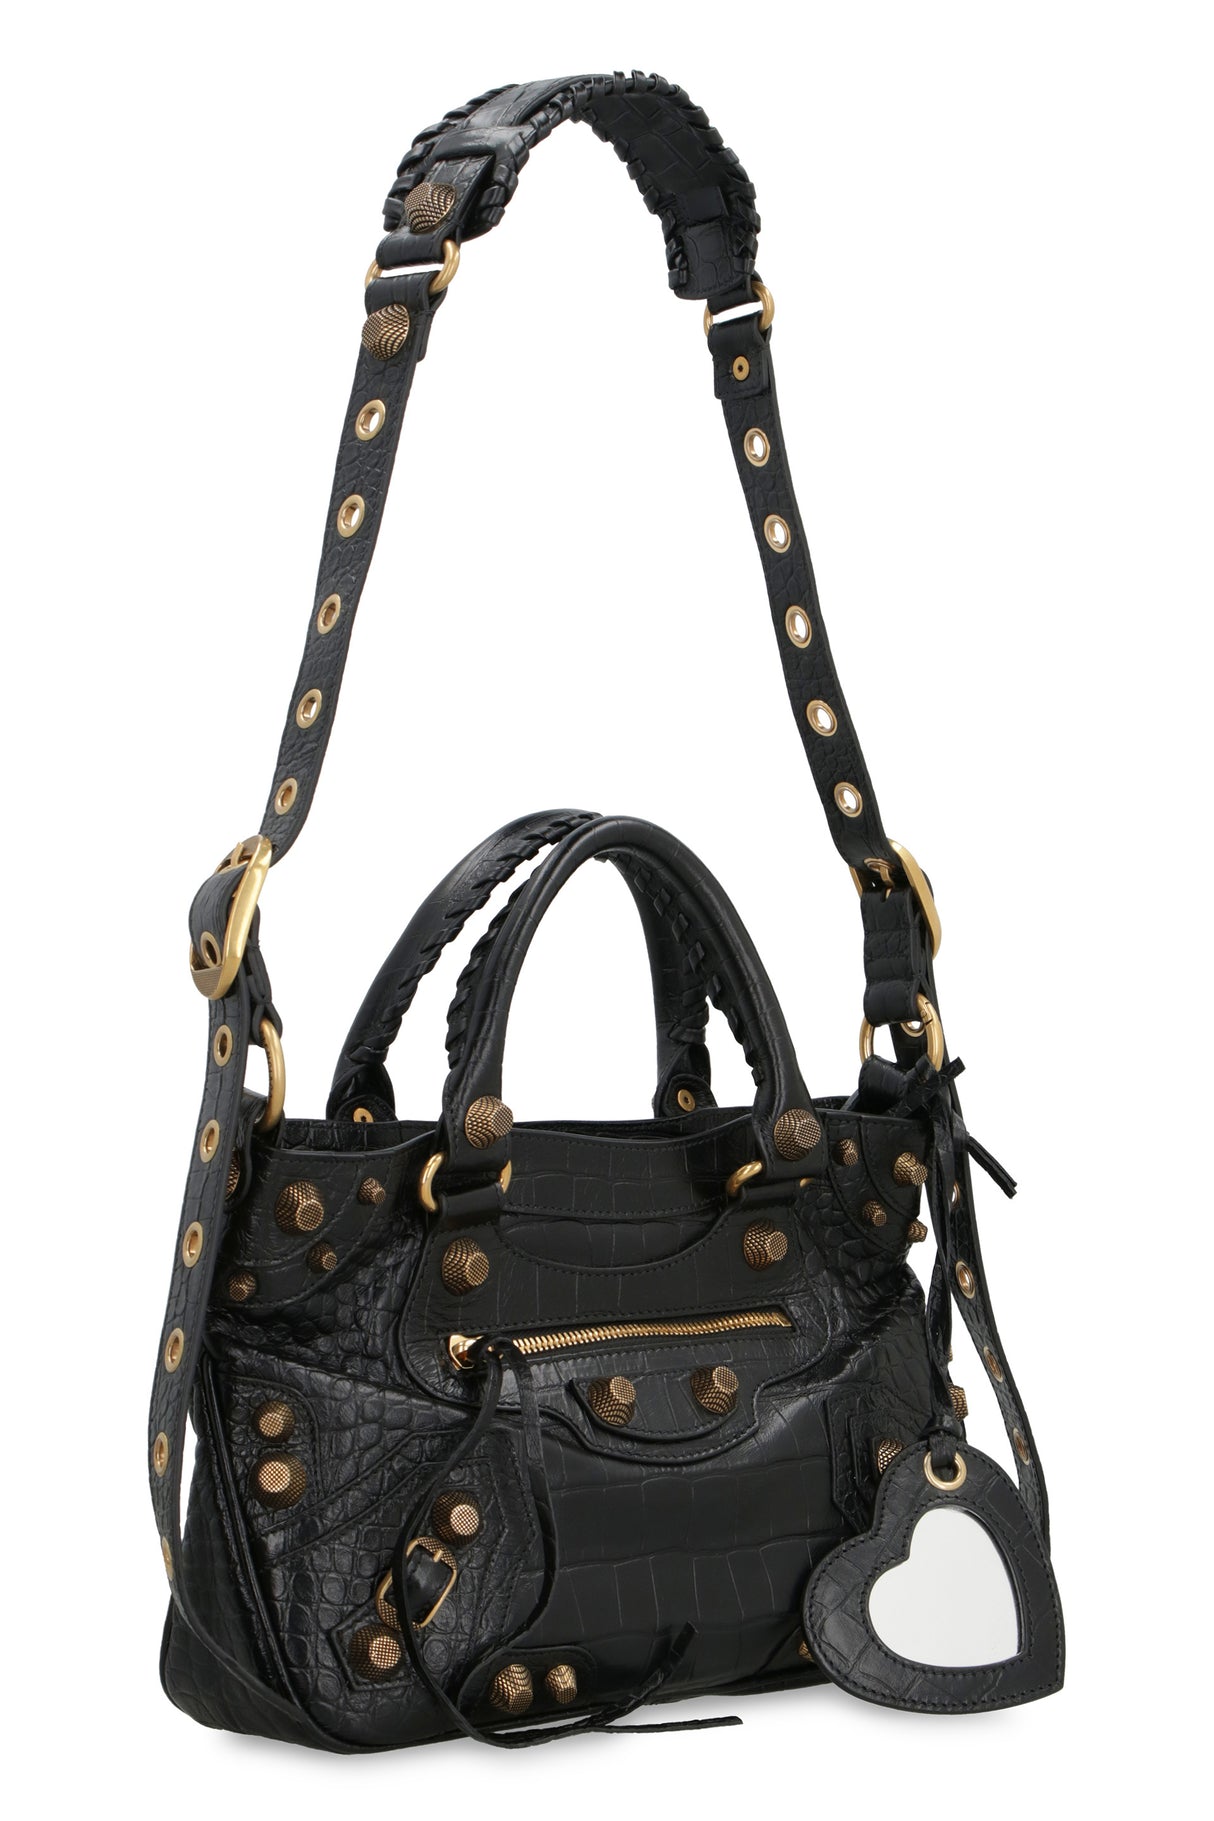 BALENCIAGA Chic Black Leather Medium Tote with Decorative Studs and Buckles, Zippered Compartments & Adjustable Strap